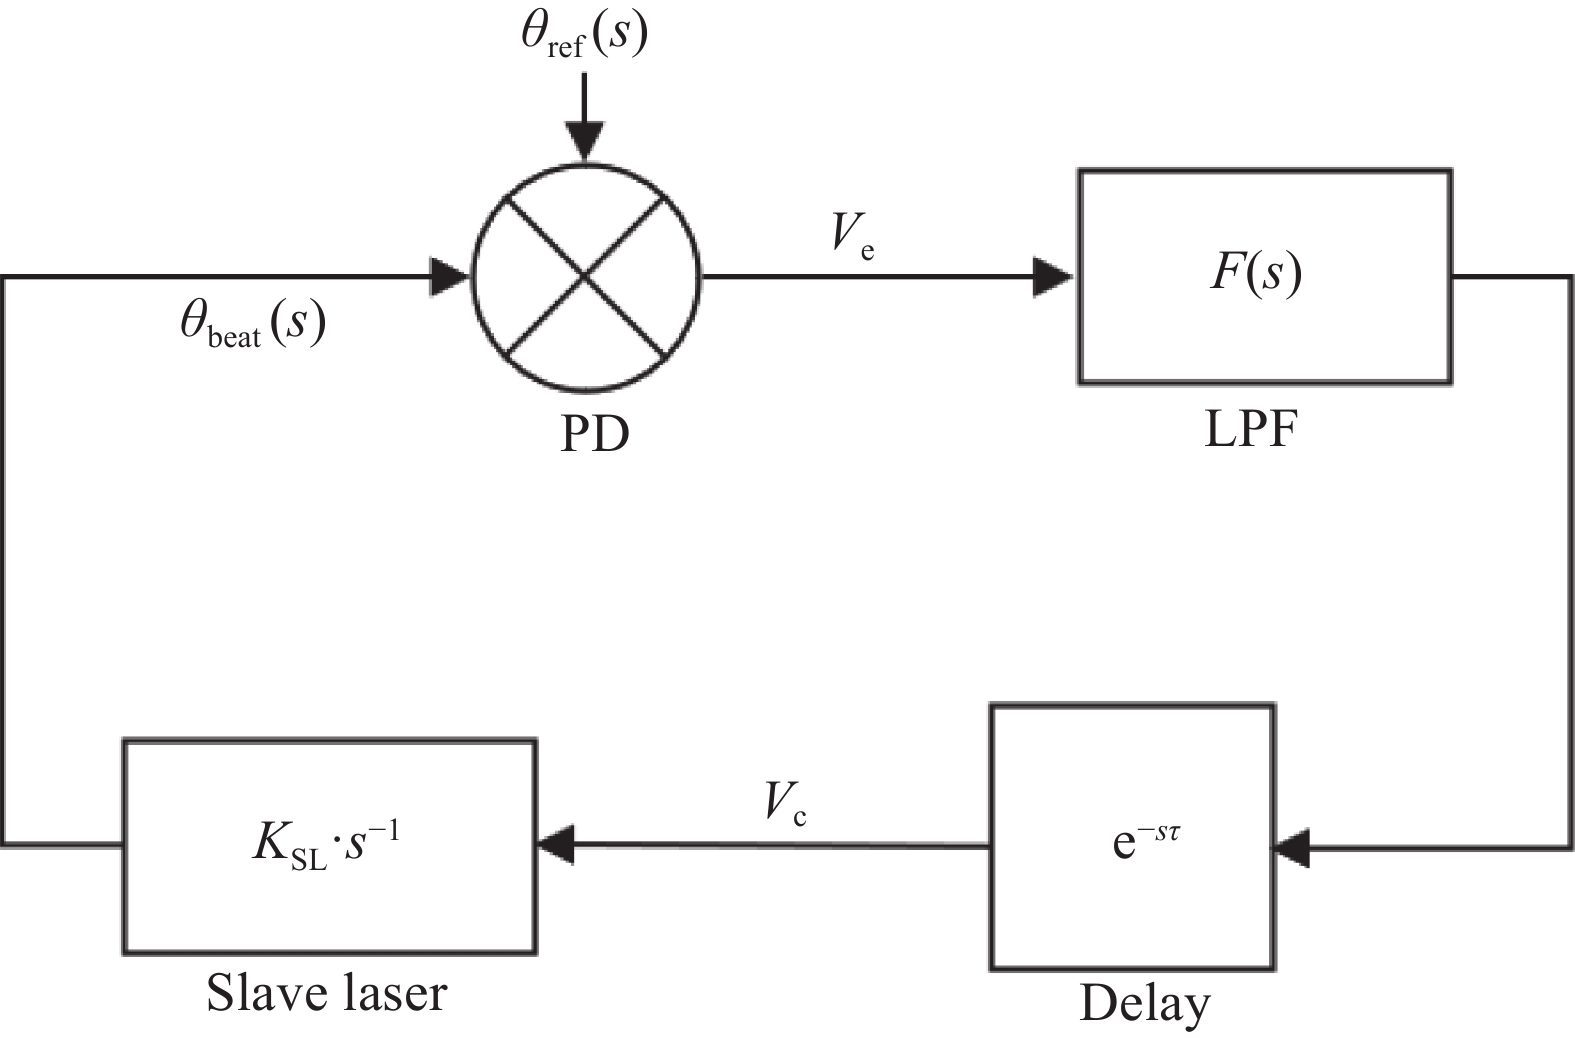 Complex frequency domain model of OPLL